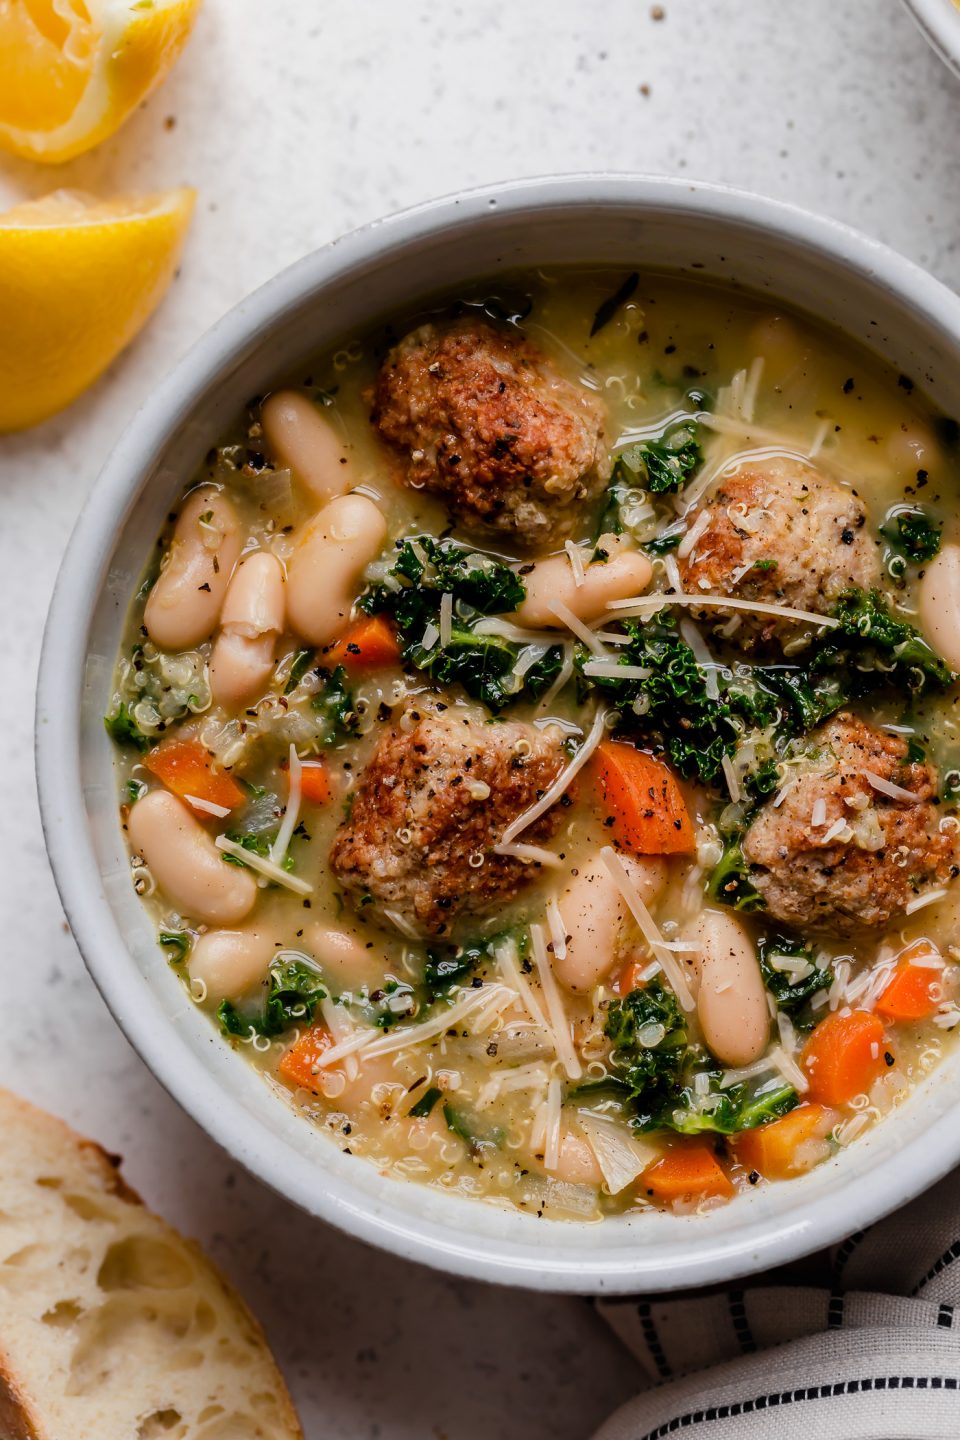 a healthy italian wedding soup recipe, made with tender chicken meatballs, quinoa, kale & cannellini beans. this lightened-up italian wedding soup gets an extra punch of flavor from lemon juice & lots of pesto, making it a cozy & comforting soup & fresh easy weeknight dinner all at once! #playswellwithbutter #italianweddingsoup #italianweddingsouprecipe #easyitalianweddingsoup #chickenmeatballsoup #chickenmeatballs #souprecipes #comfortfood #comfortfooddinners #soup #italianrecipes #italiansoup